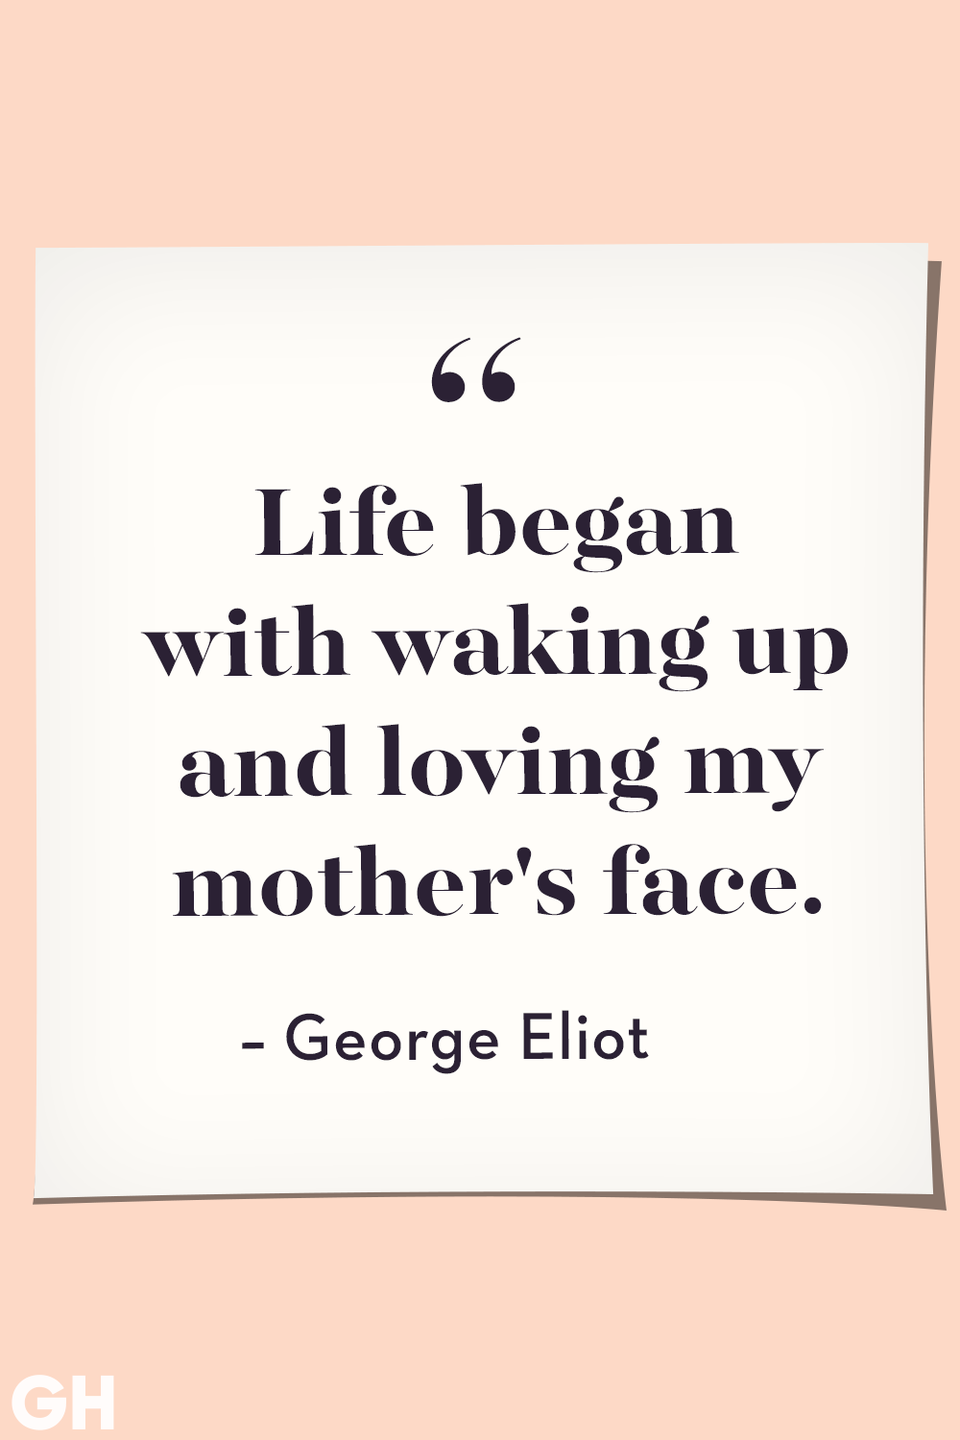 <p>Life began with waking up and loving my mother's face.</p>